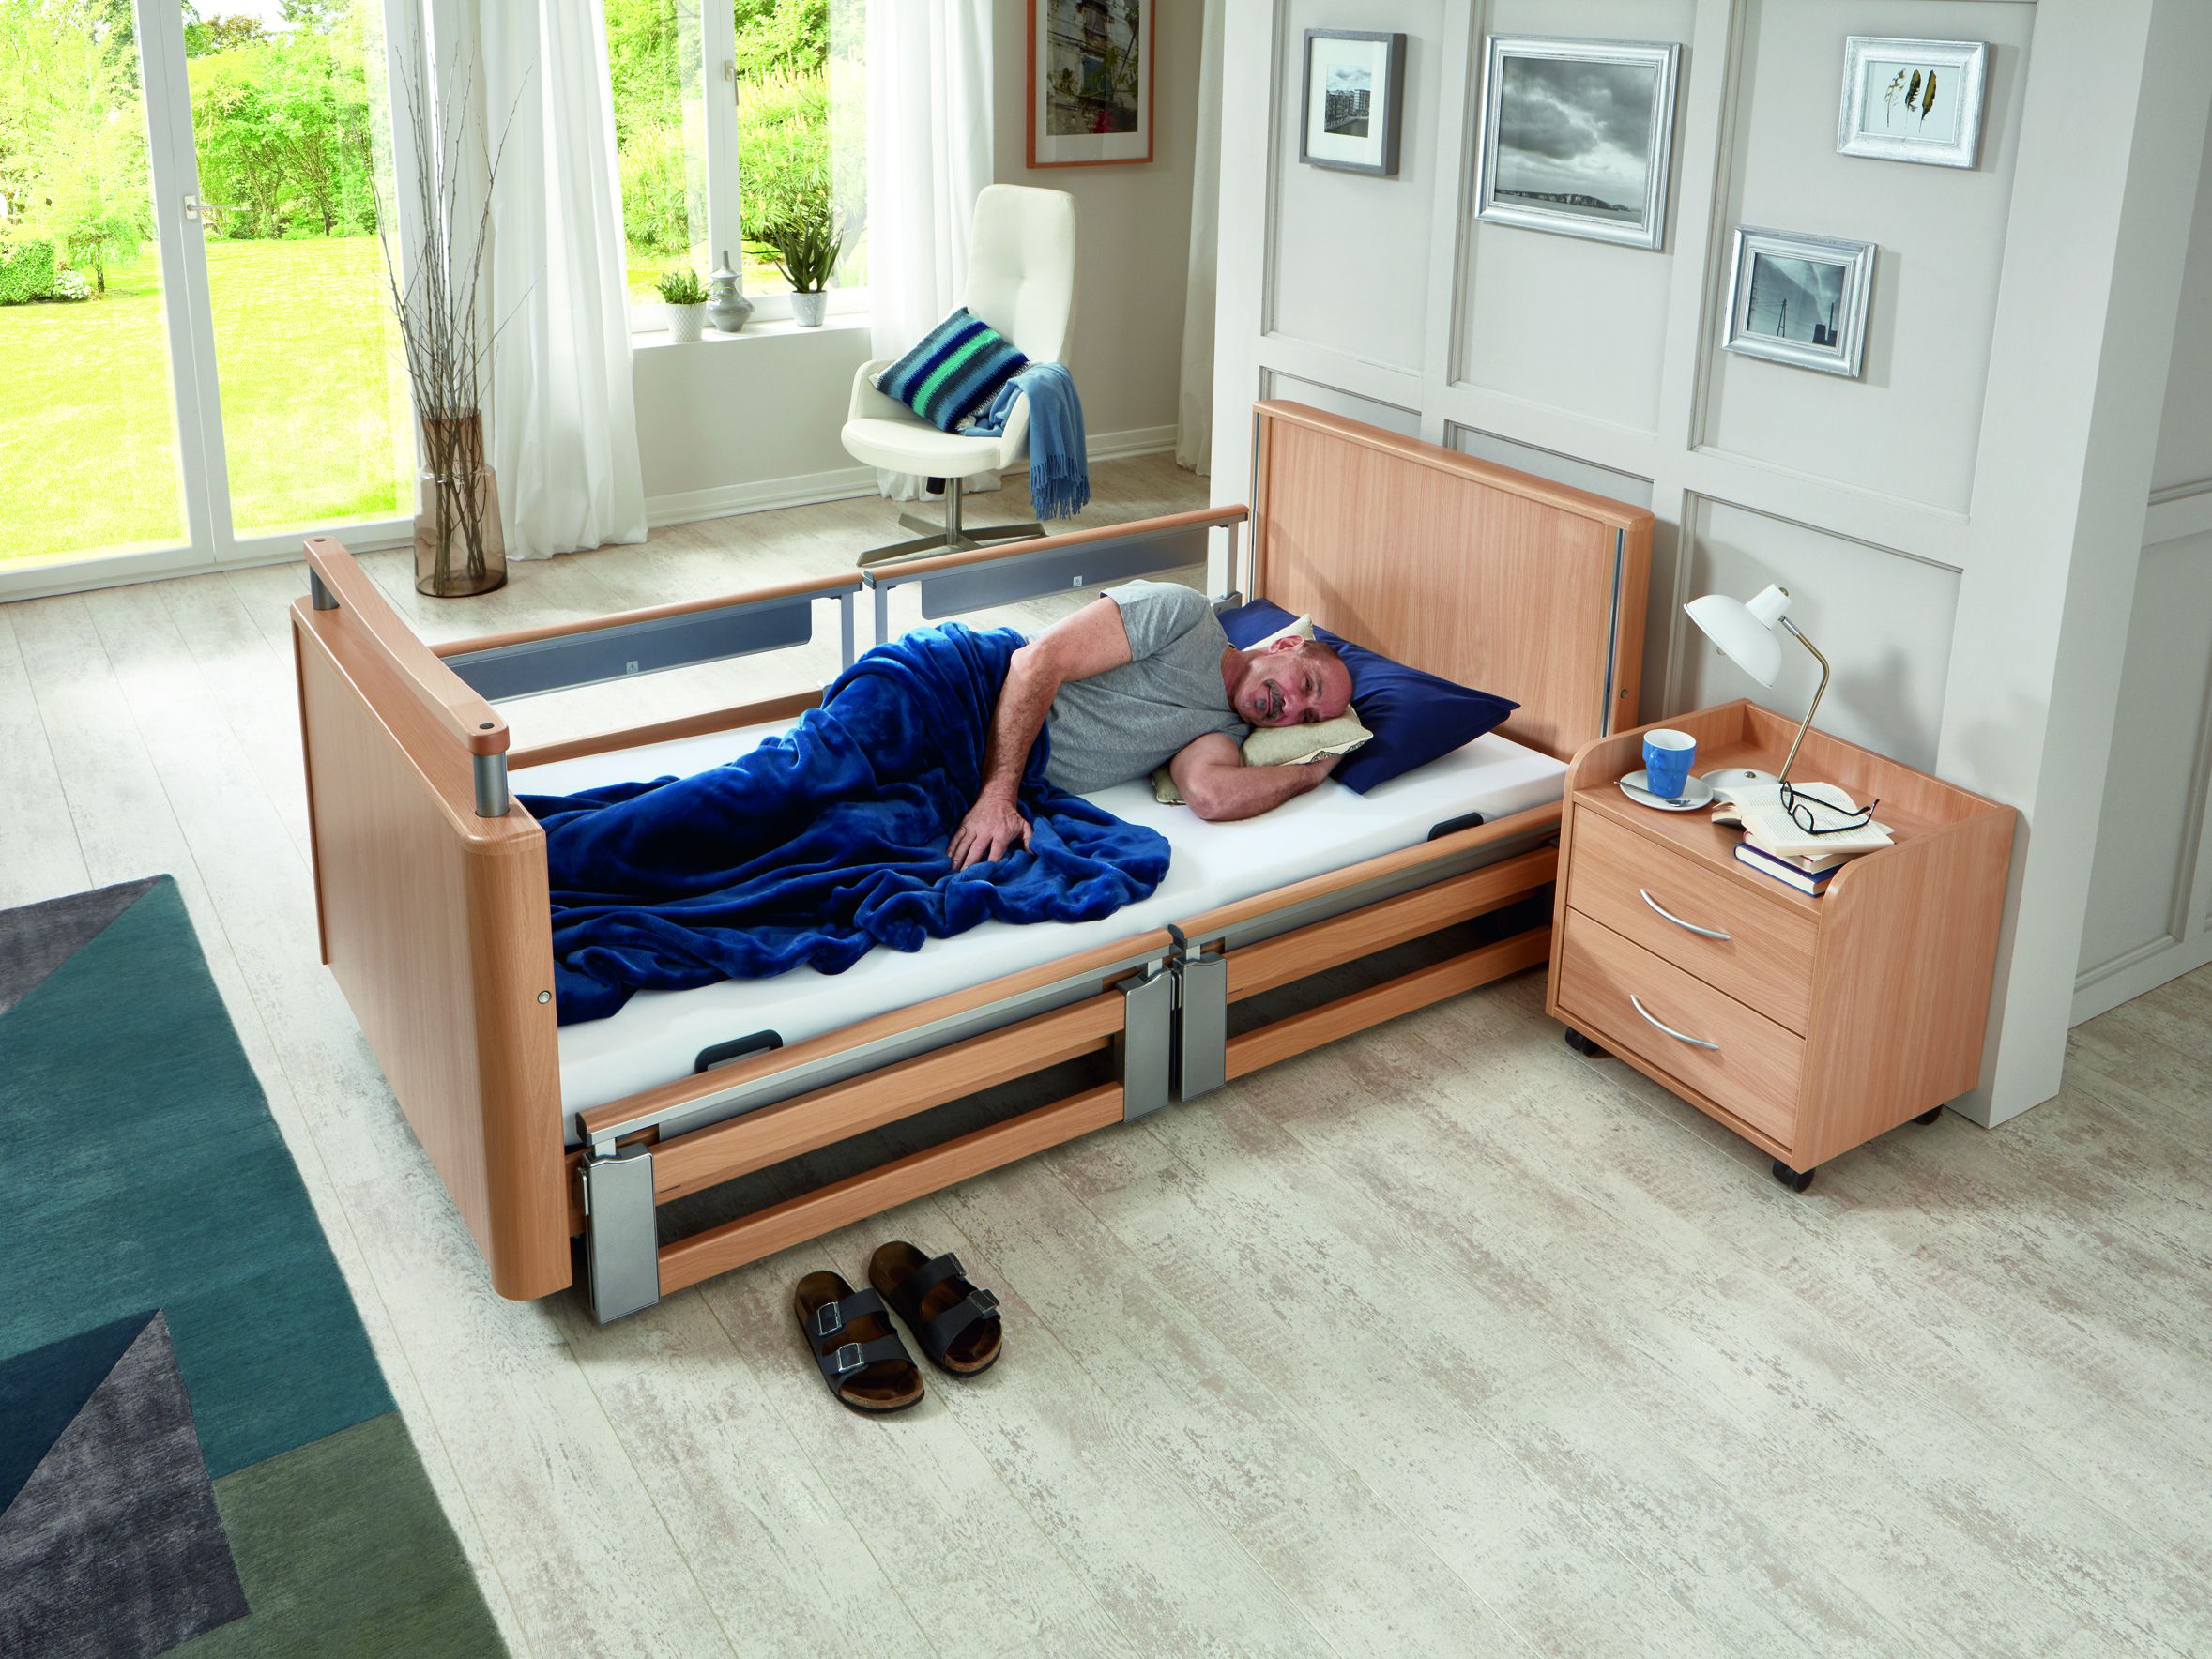 Fall prevention with the Inovia low-height bed